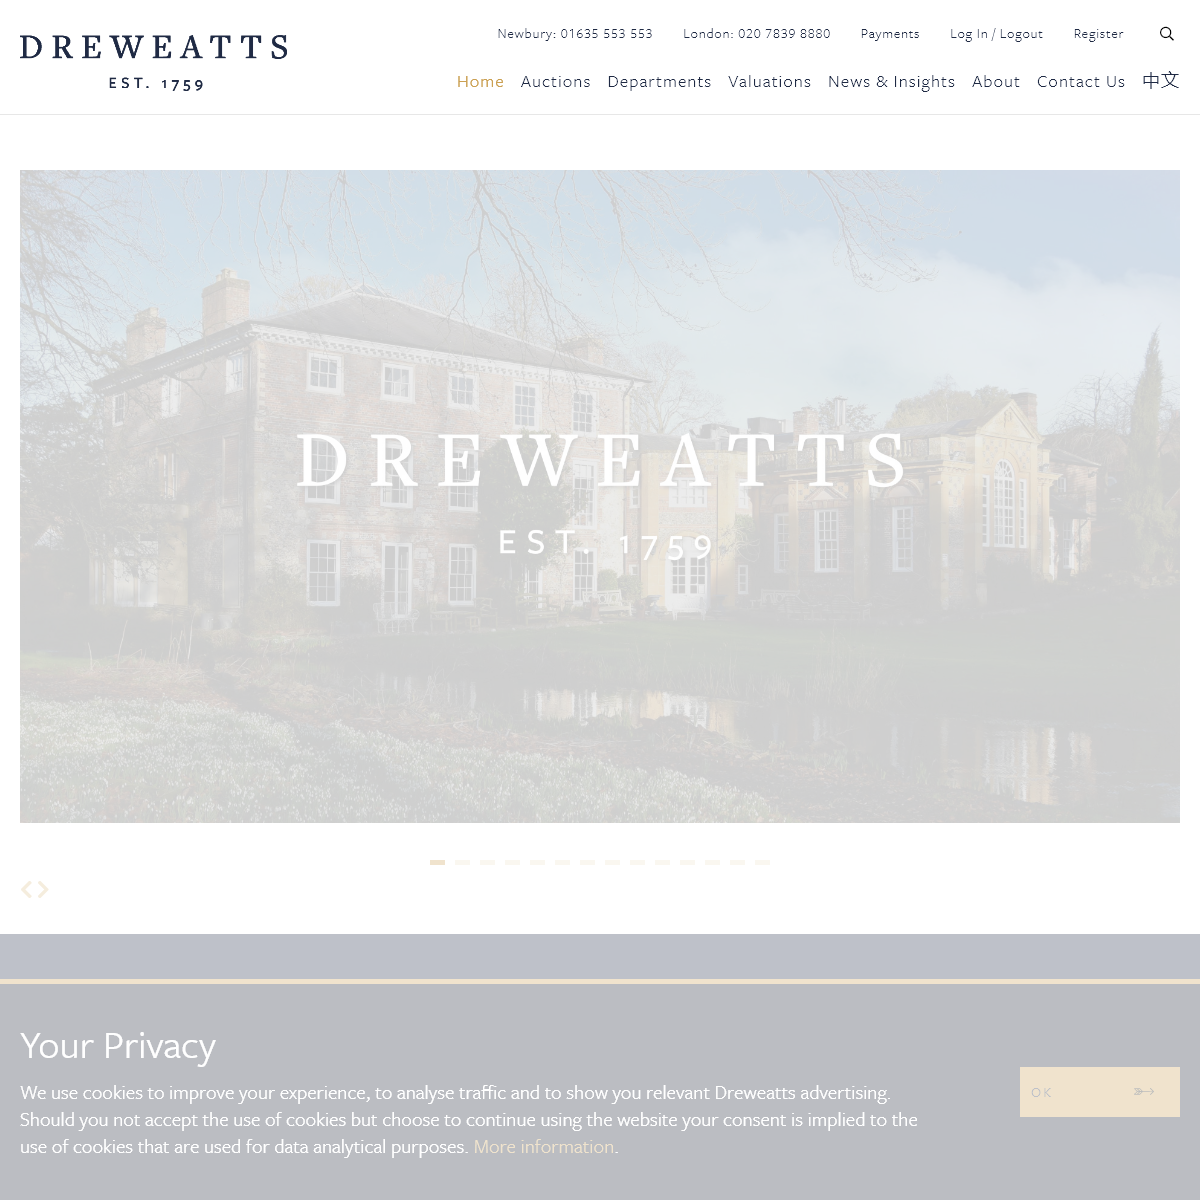 A complete backup of dreweatts.com